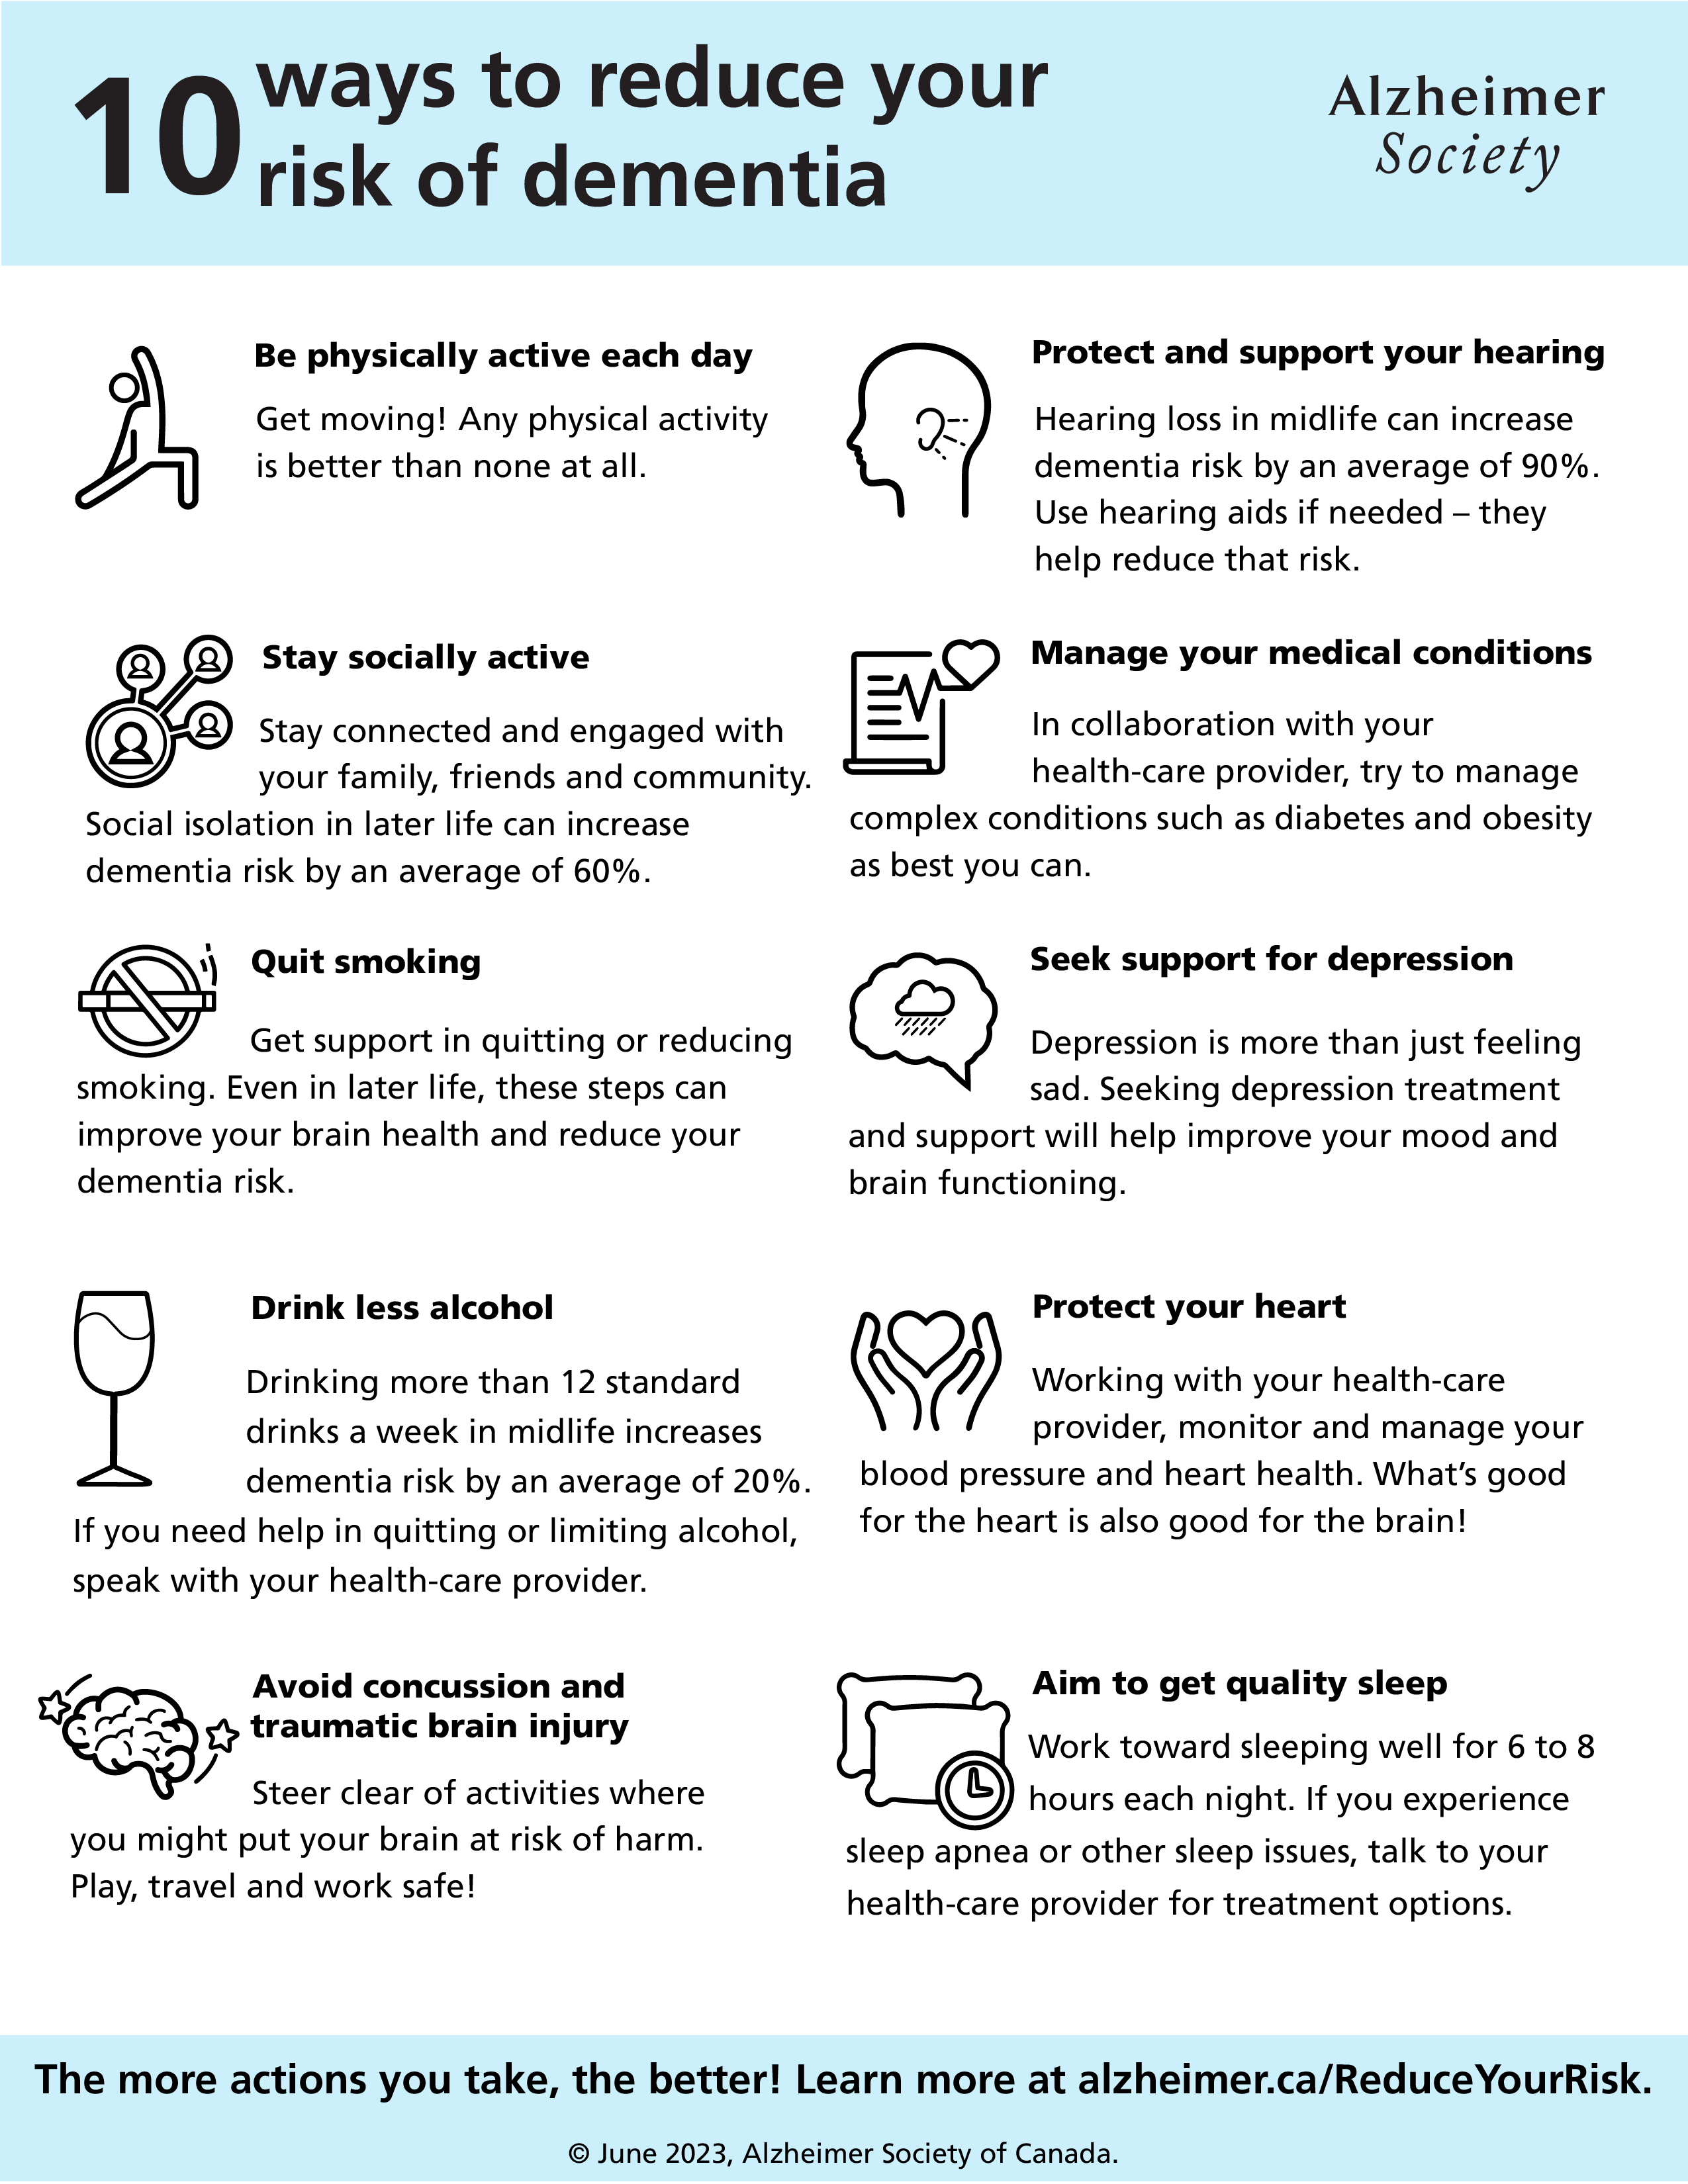 10 ways to reduce your risk of dementia poster—Alzheimer Society of Canada